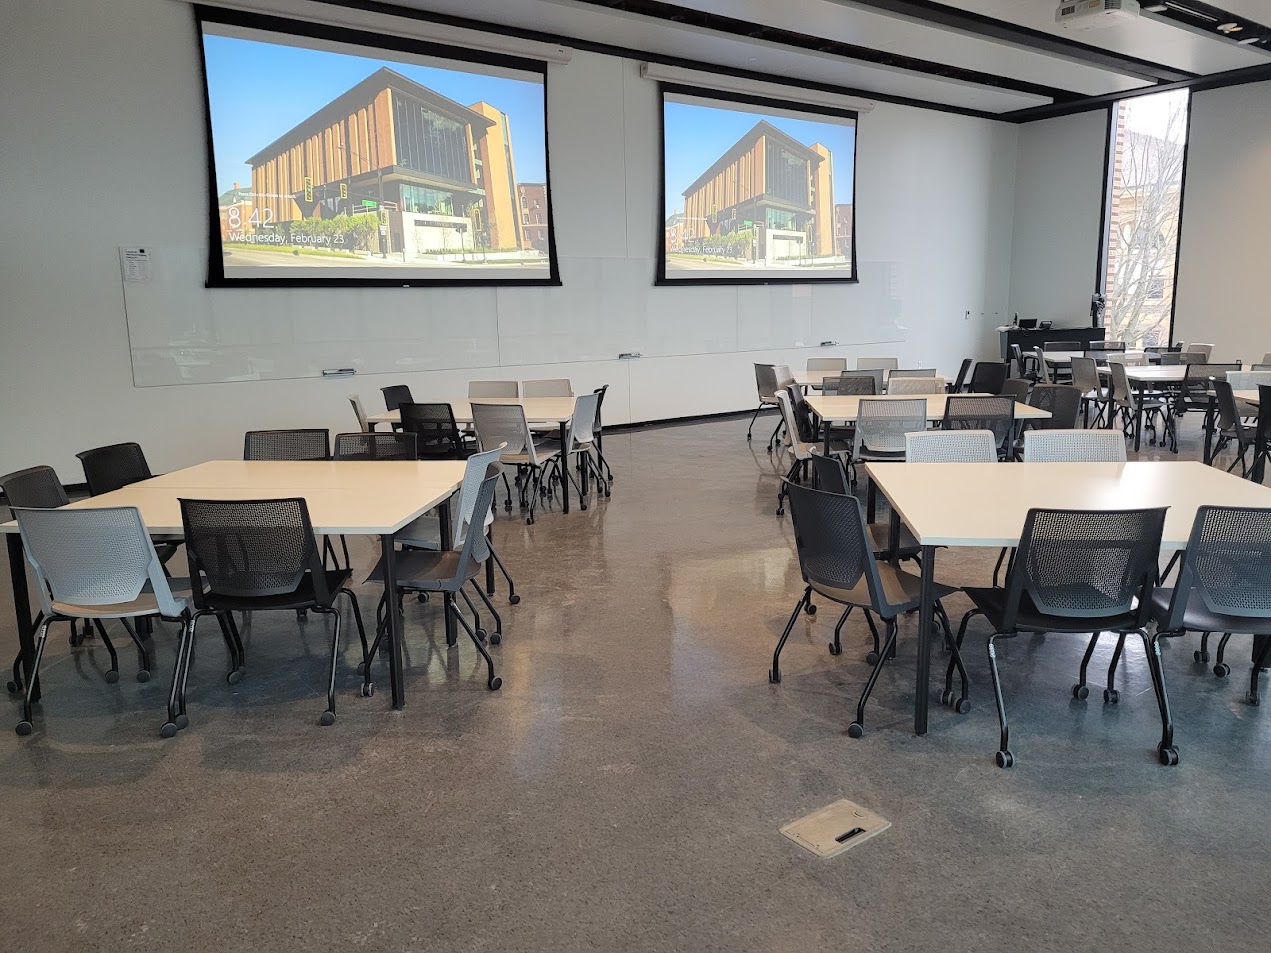 This is a view of the room with student tables and chairs, projection screens, a front lecture table, glass boards, and windows.